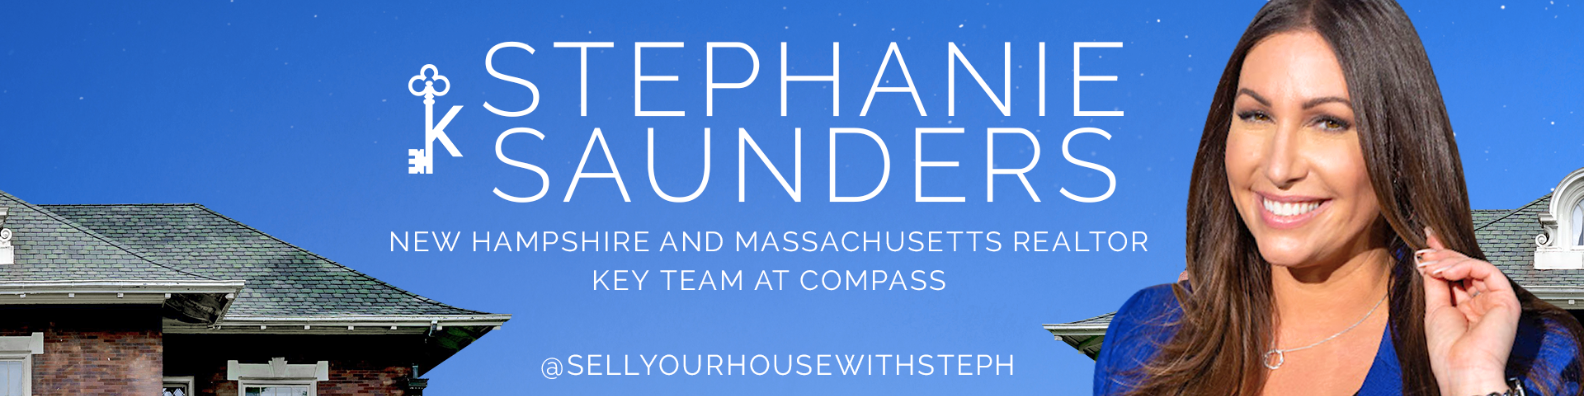 Stephanie Saunders REALTOR NH and MA Key Team at Compass New England Real Estate